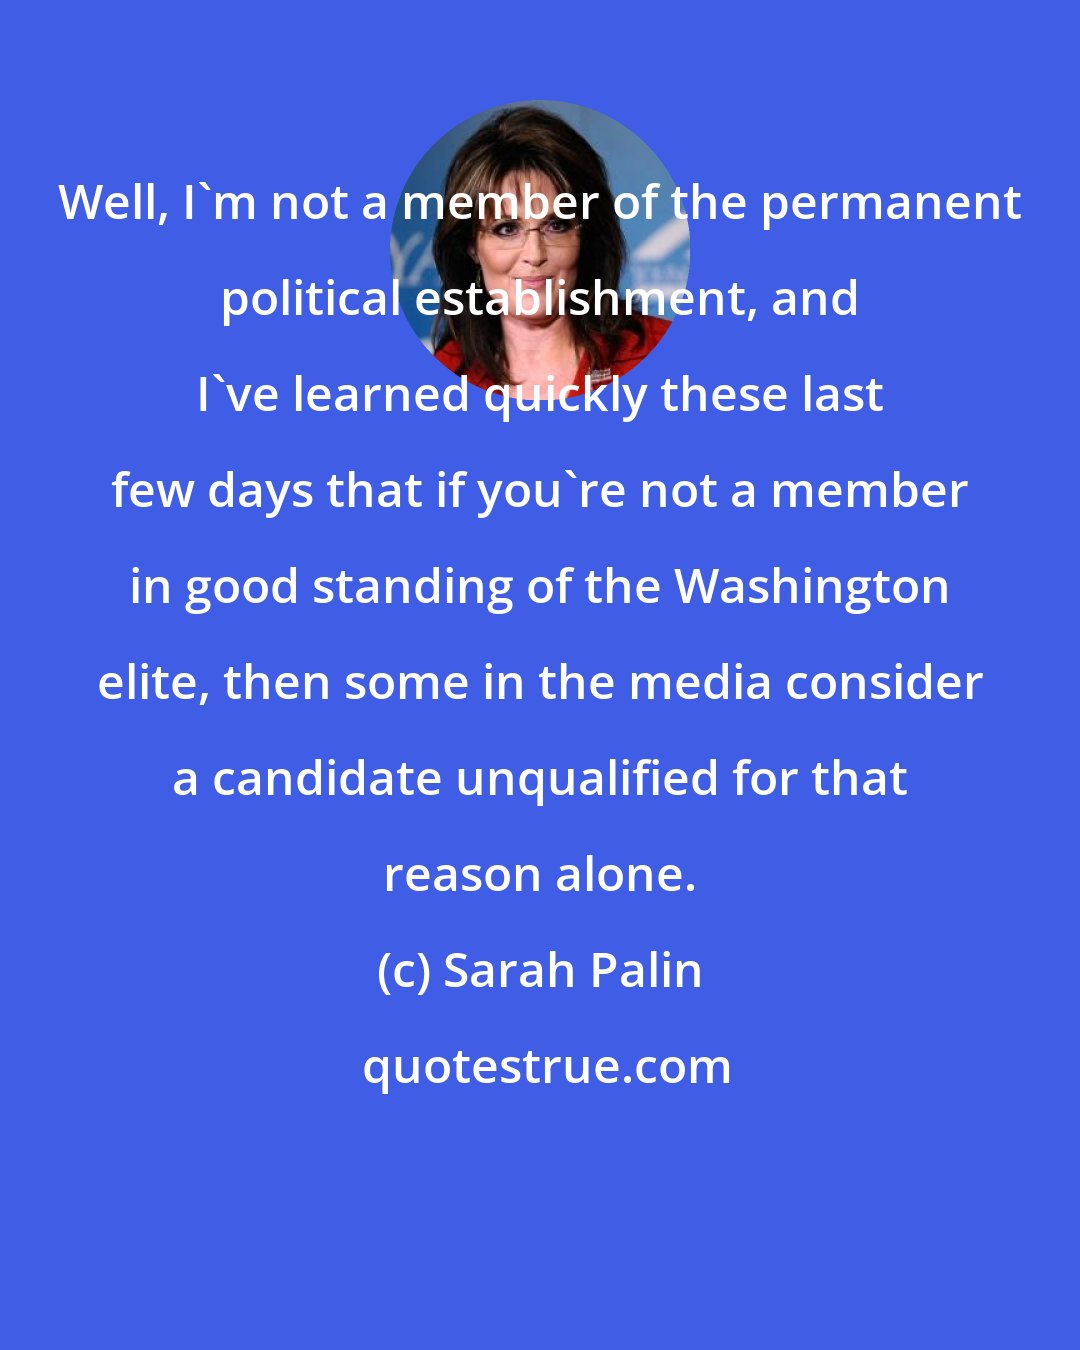 Sarah Palin: Well, I'm not a member of the permanent political establishment, and I've learned quickly these last few days that if you're not a member in good standing of the Washington elite, then some in the media consider a candidate unqualified for that reason alone.